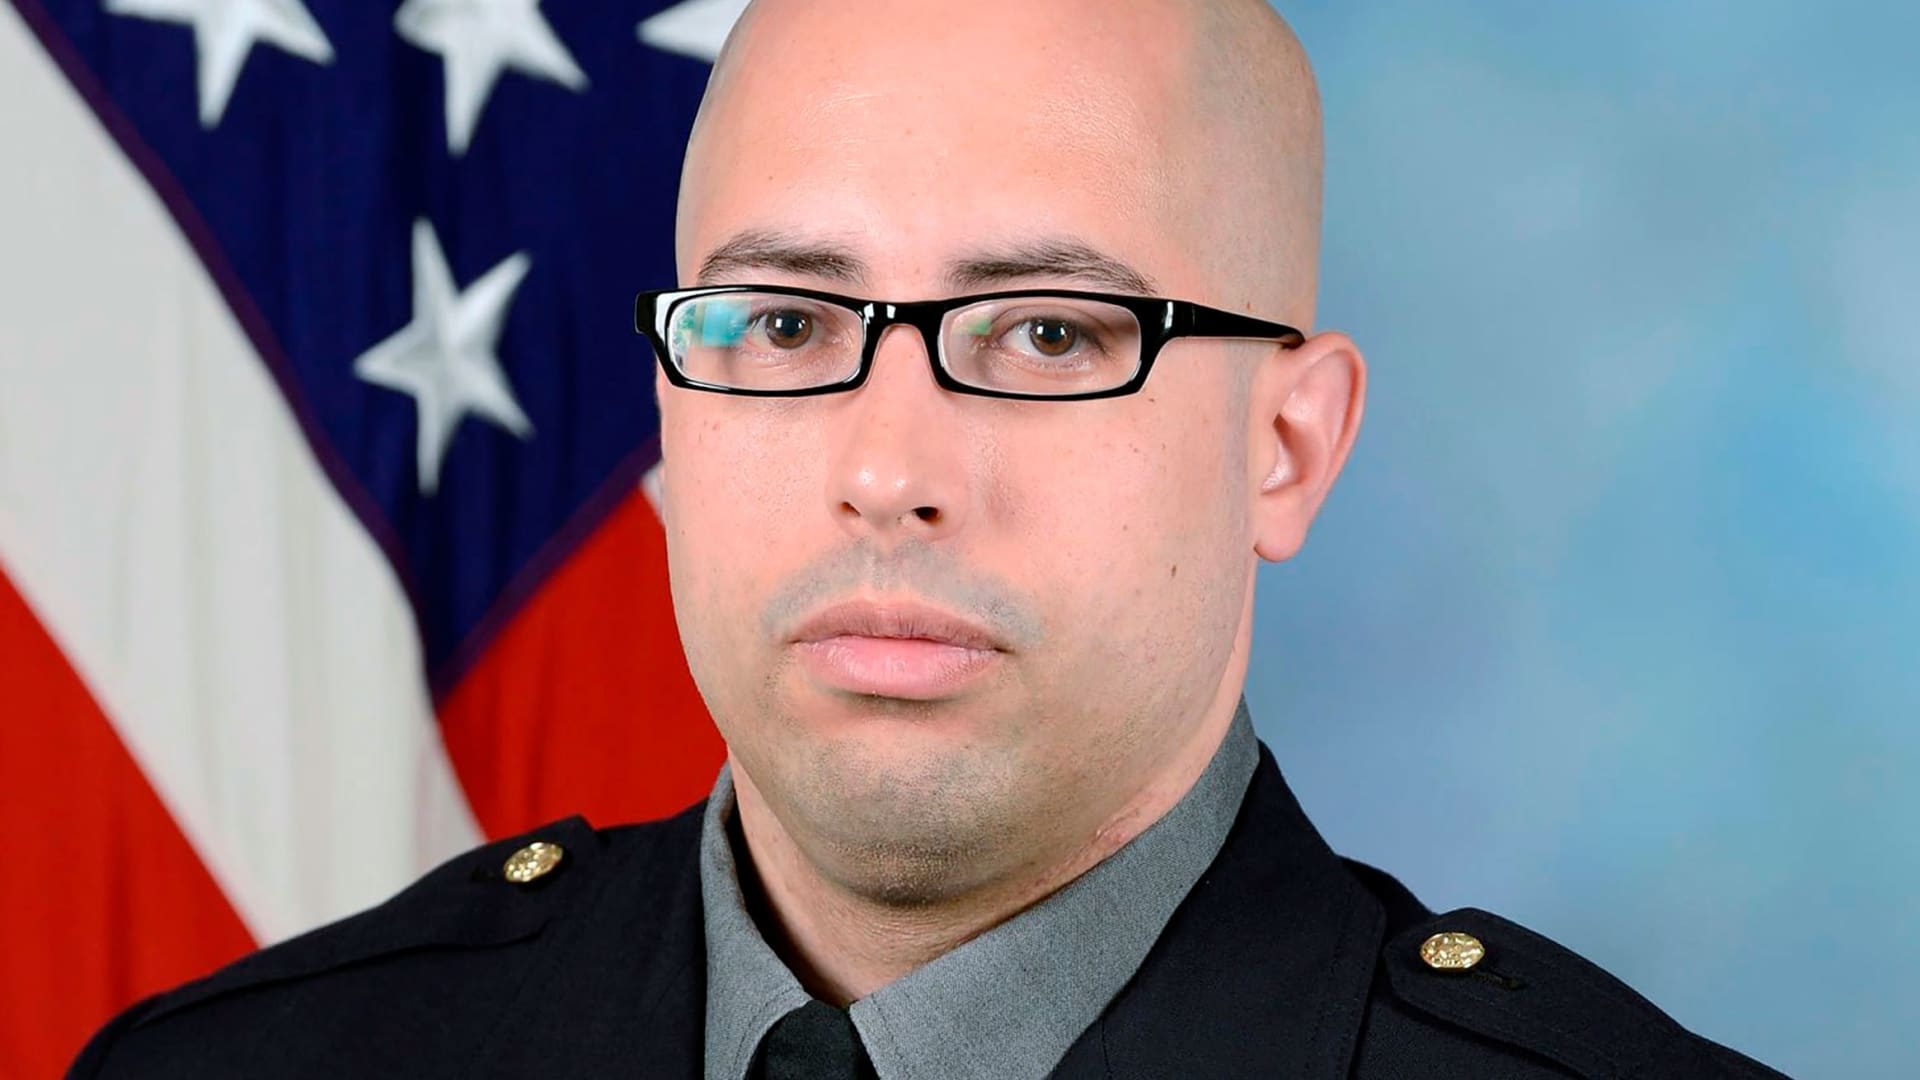 This undated photo provided by the Pentagon Force Protection Agency shows Pentagon Police Officer George Gonzalez. On Tuesday, Aug. 3, 2021, Gonzalez died after being stabbed during a burst of violence at a transit center outside the Pentagon building, and a suspect was shot by law enforcement and died at the scene.